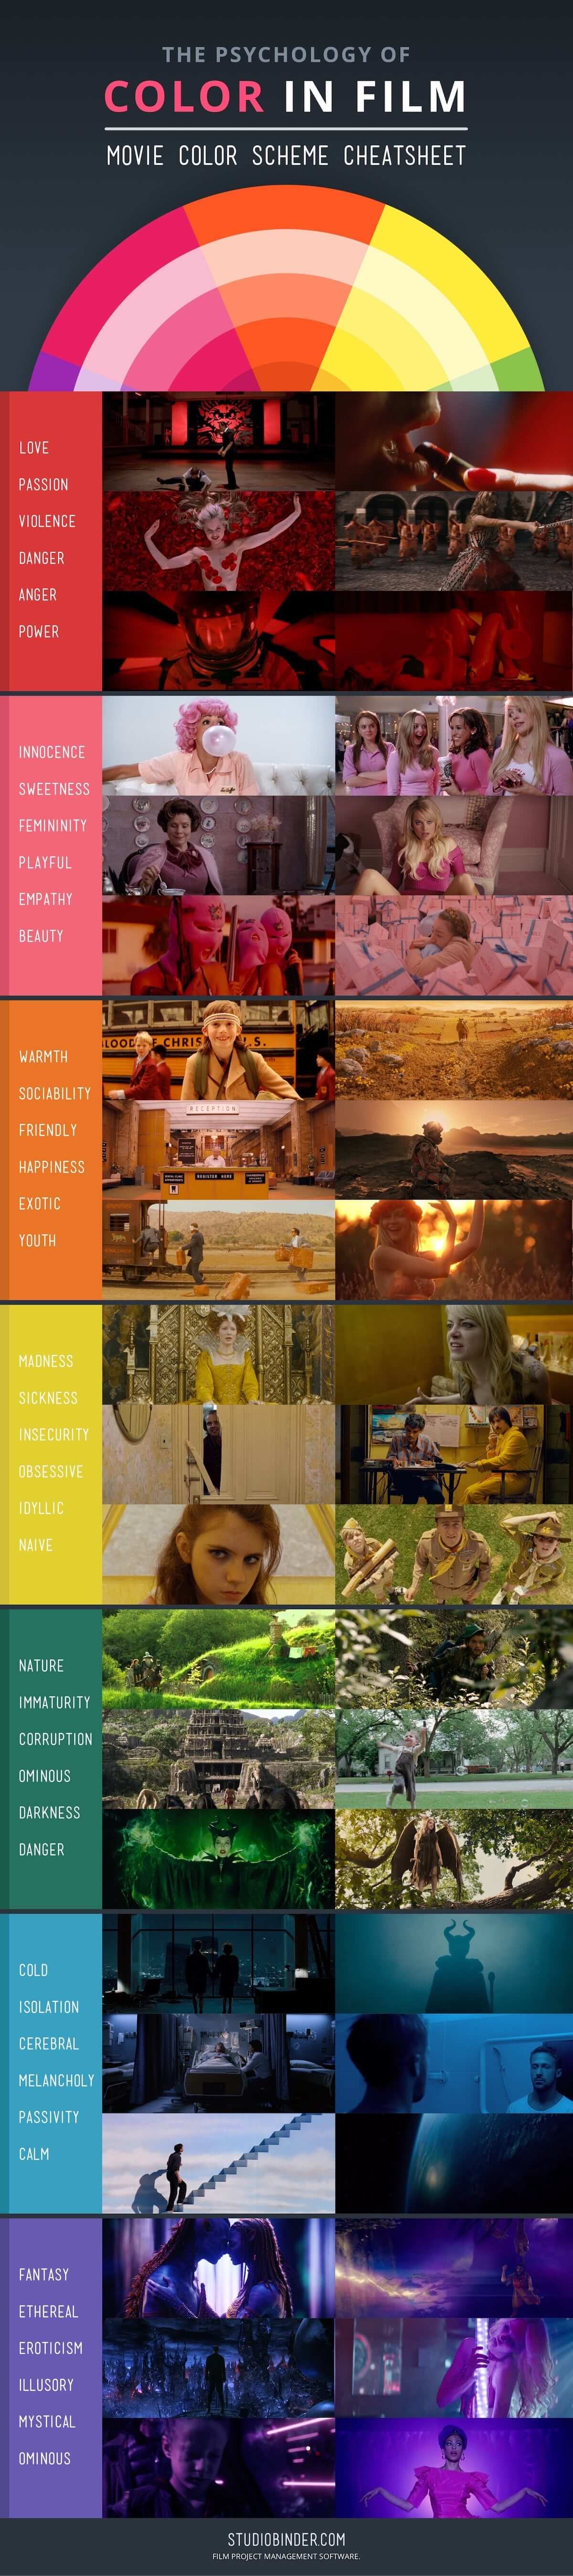 How To Use Color In Film 50 Examples Of Movie Color Palettes 2955